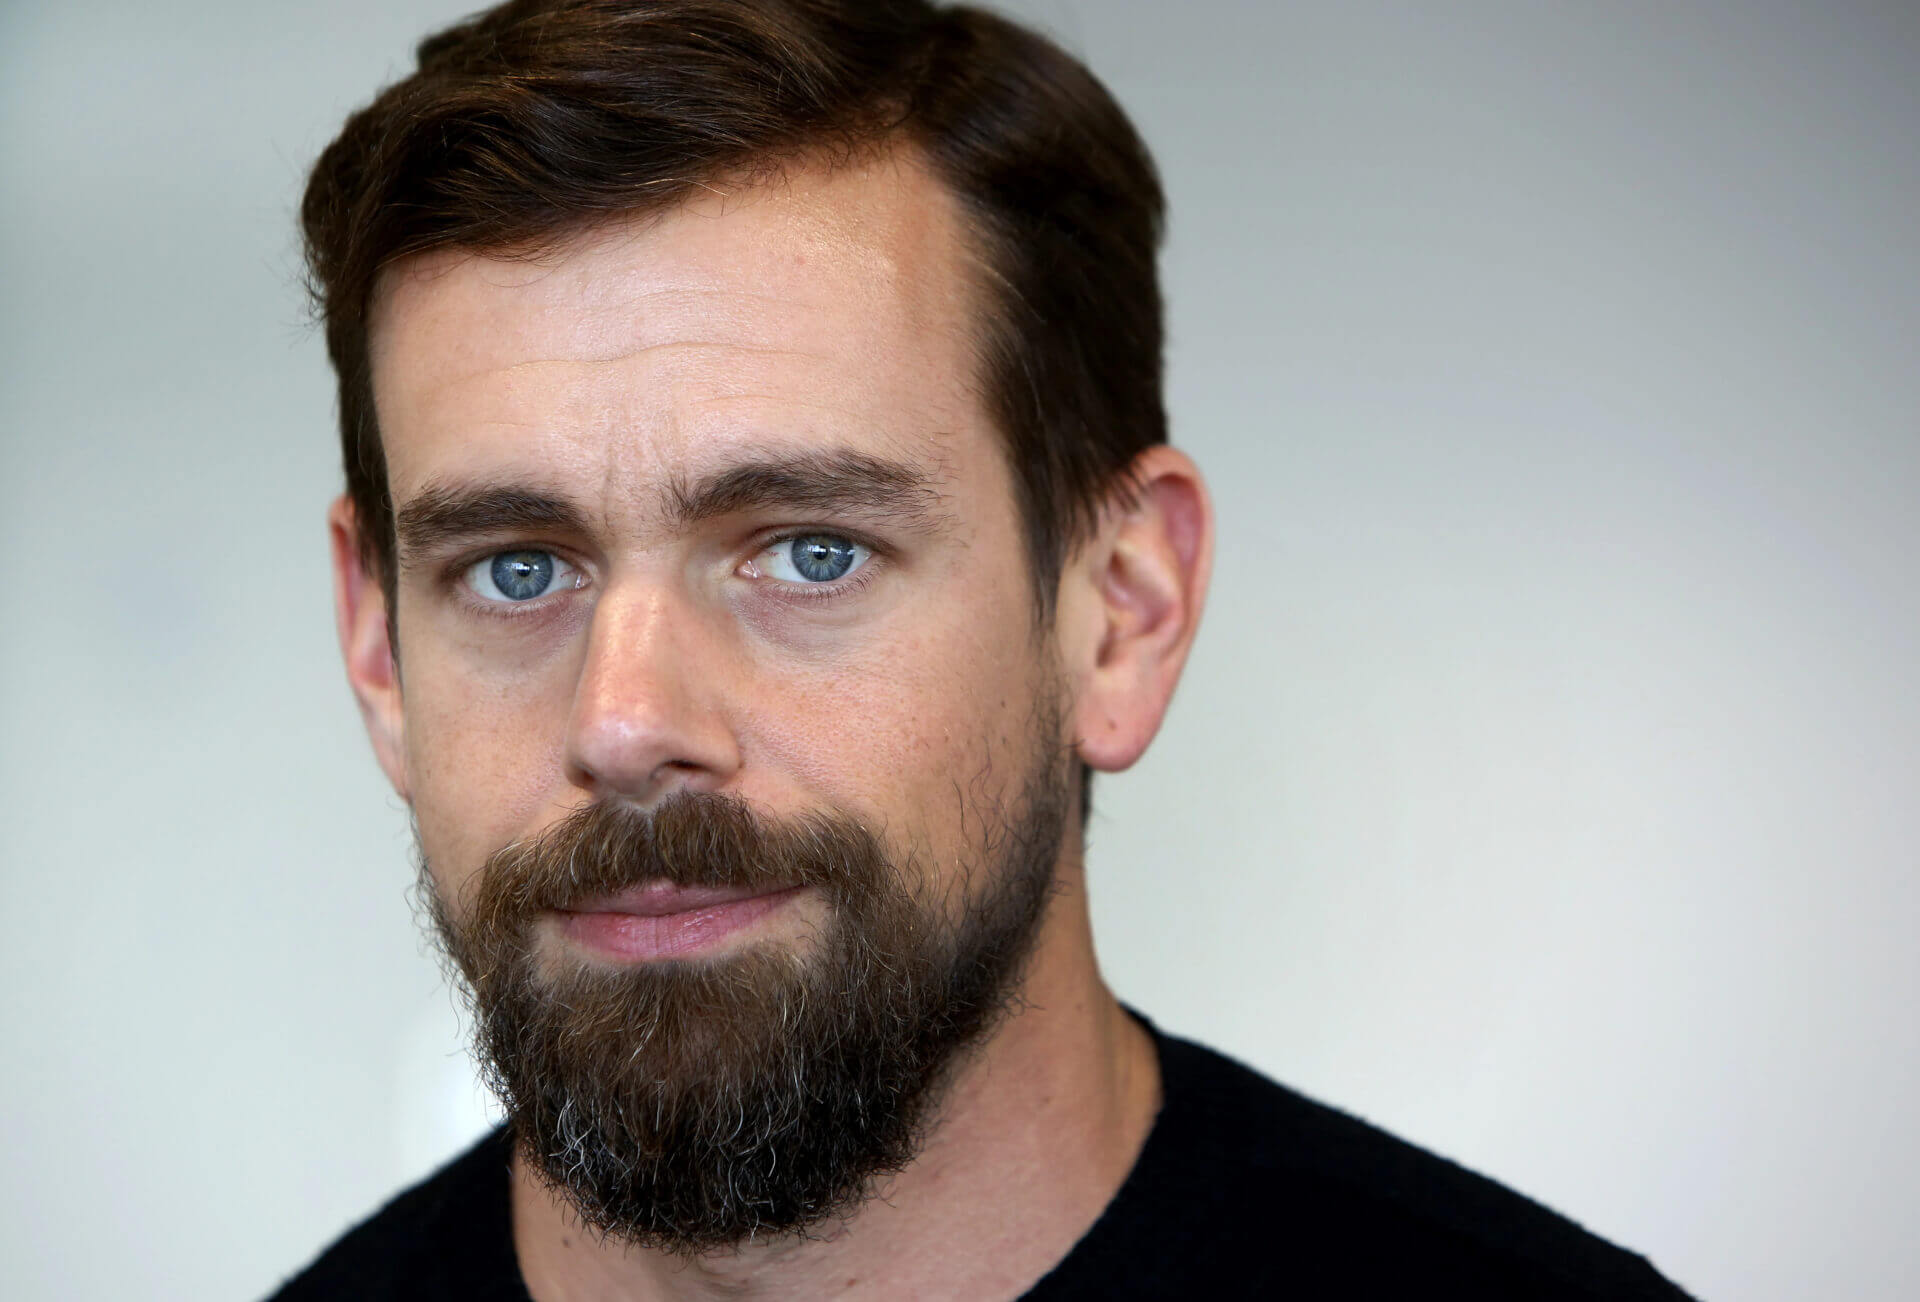 Former CEO Jack Dorsey Claims India Threatened to Shut Down Twitter, Government Calls it “Outright Lie”